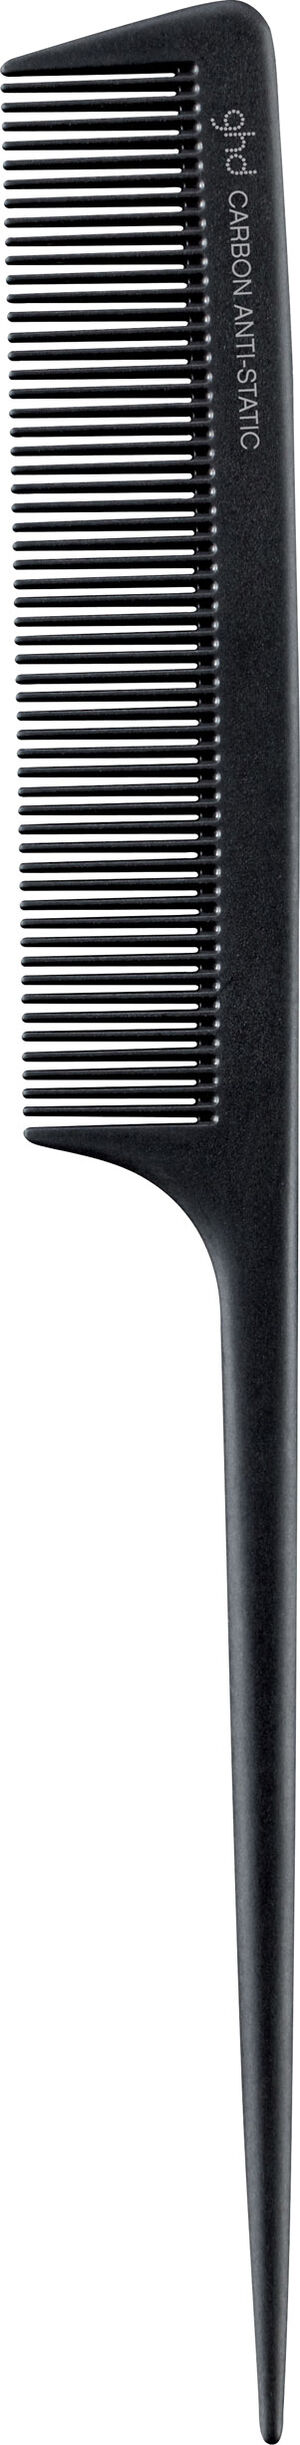 Carbon Tail Comb (Sleeved)